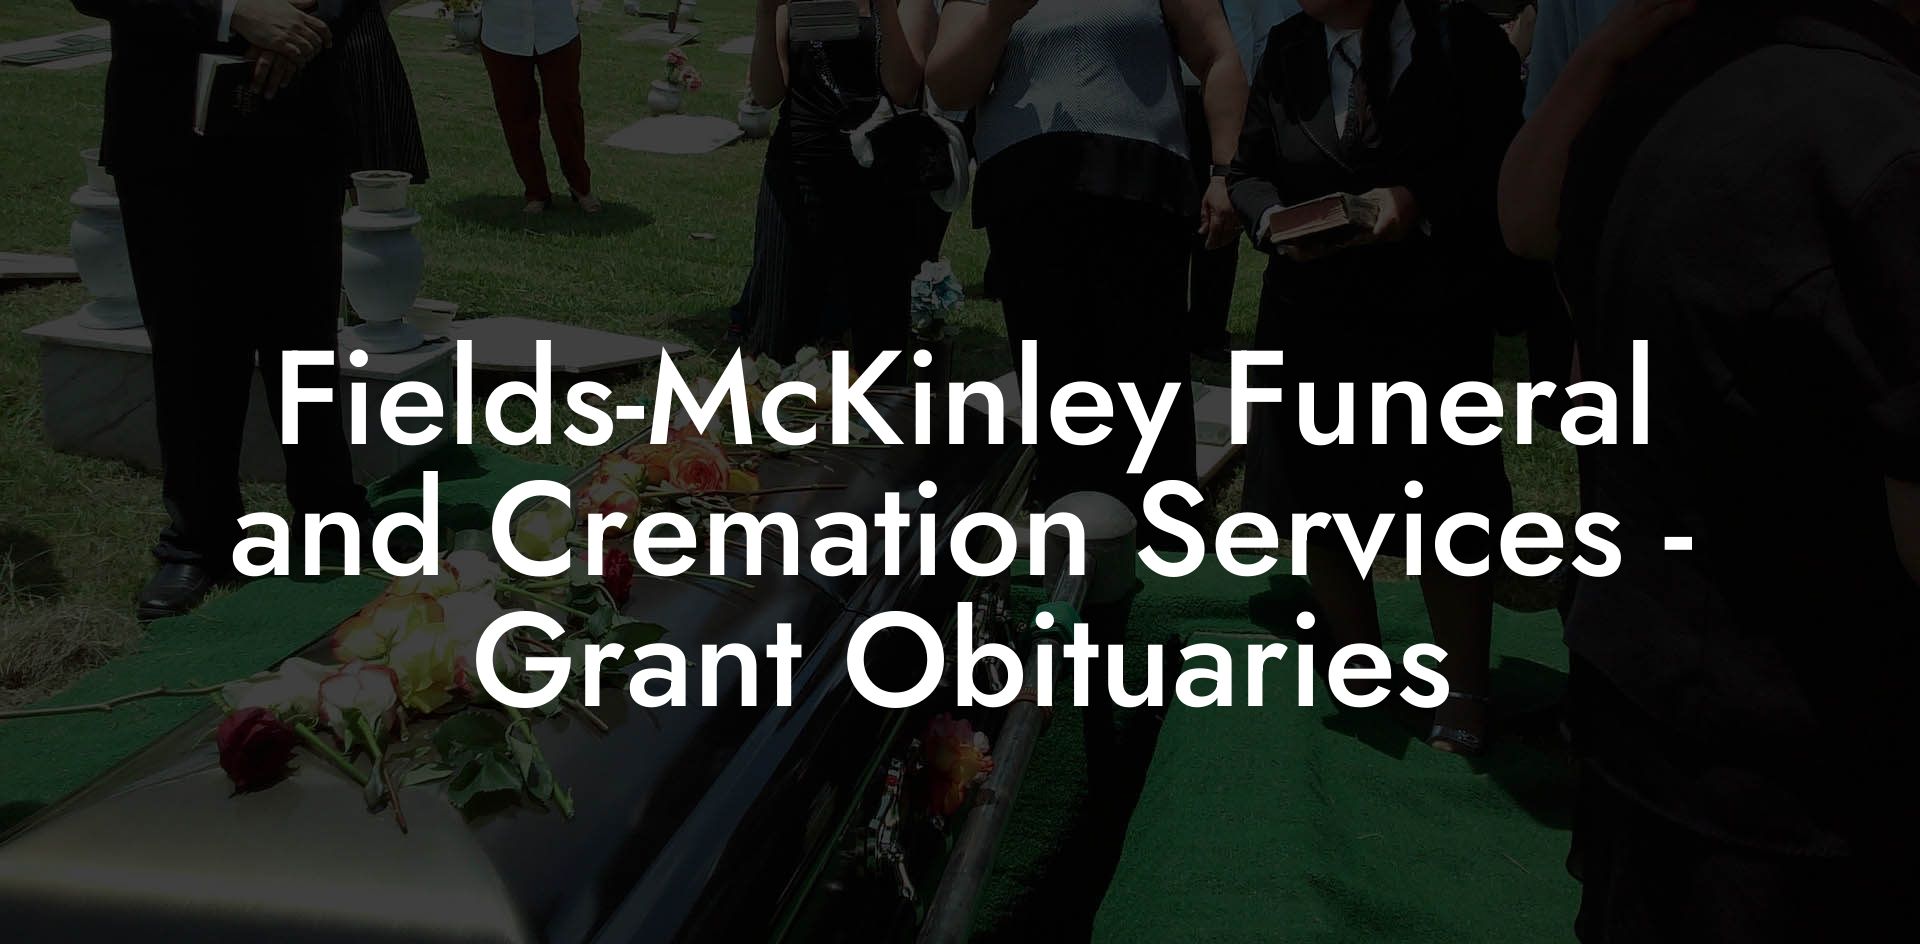 Fields-McKinley Funeral and Cremation Services - Grant Obituaries